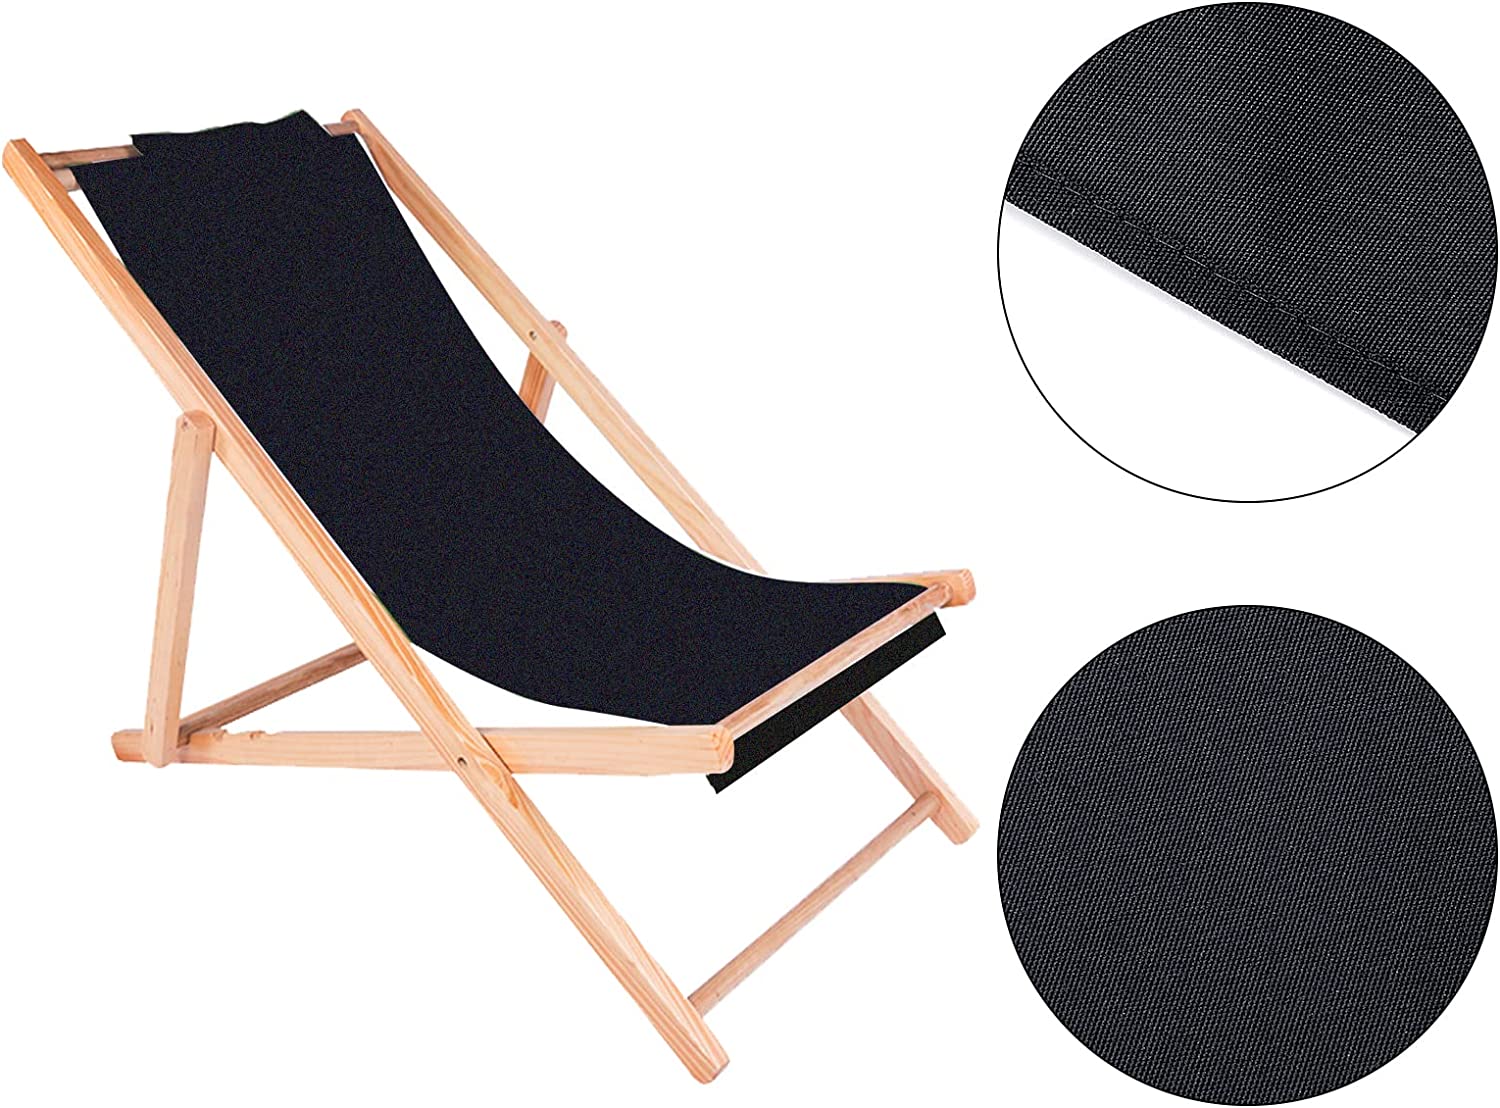 Beach Sling Chair Replacement Fabric Black Casual Simple Beach Chair Replacement Oxford Cloth for Home Beach Chair Protect Replacement (44.69x17.13inch) - image 2 of 5